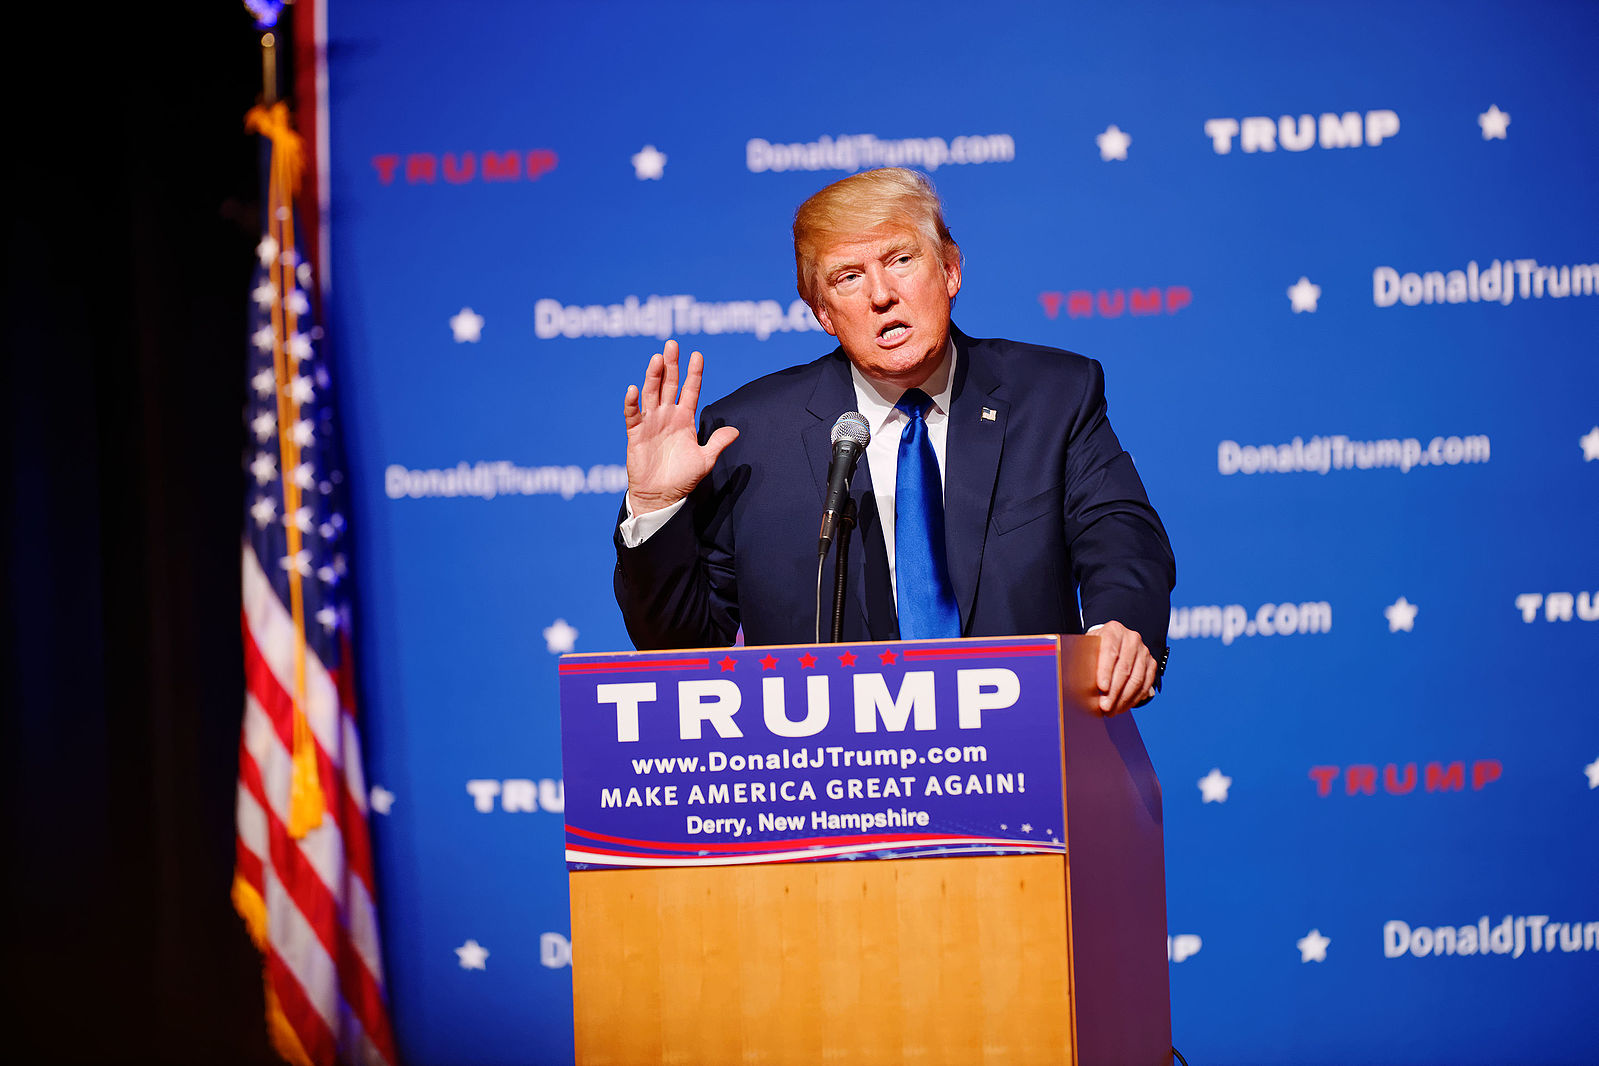 Donald Trump addresses a town-hall meeting in Derry, N.H. on Aug. 19, 2015. (Michael Vadon/Wikimedia Commons)